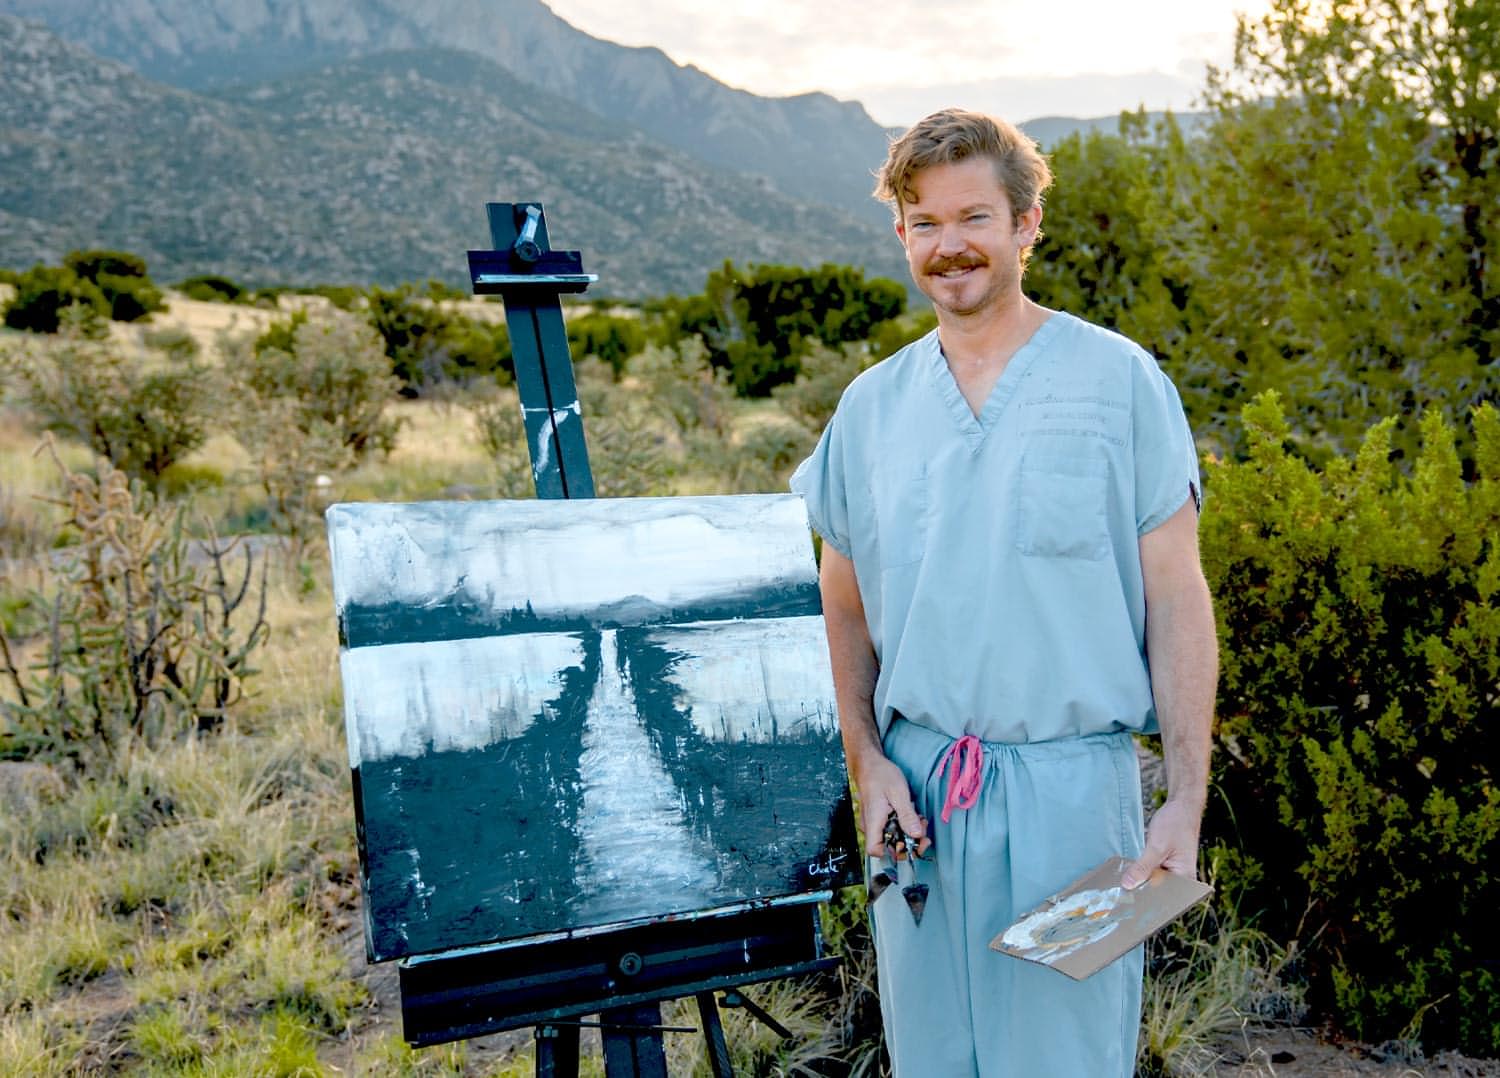 Bevan Choate wearing medical scrubs and standing among hills and shrubs, smiles next to a palette knife painting